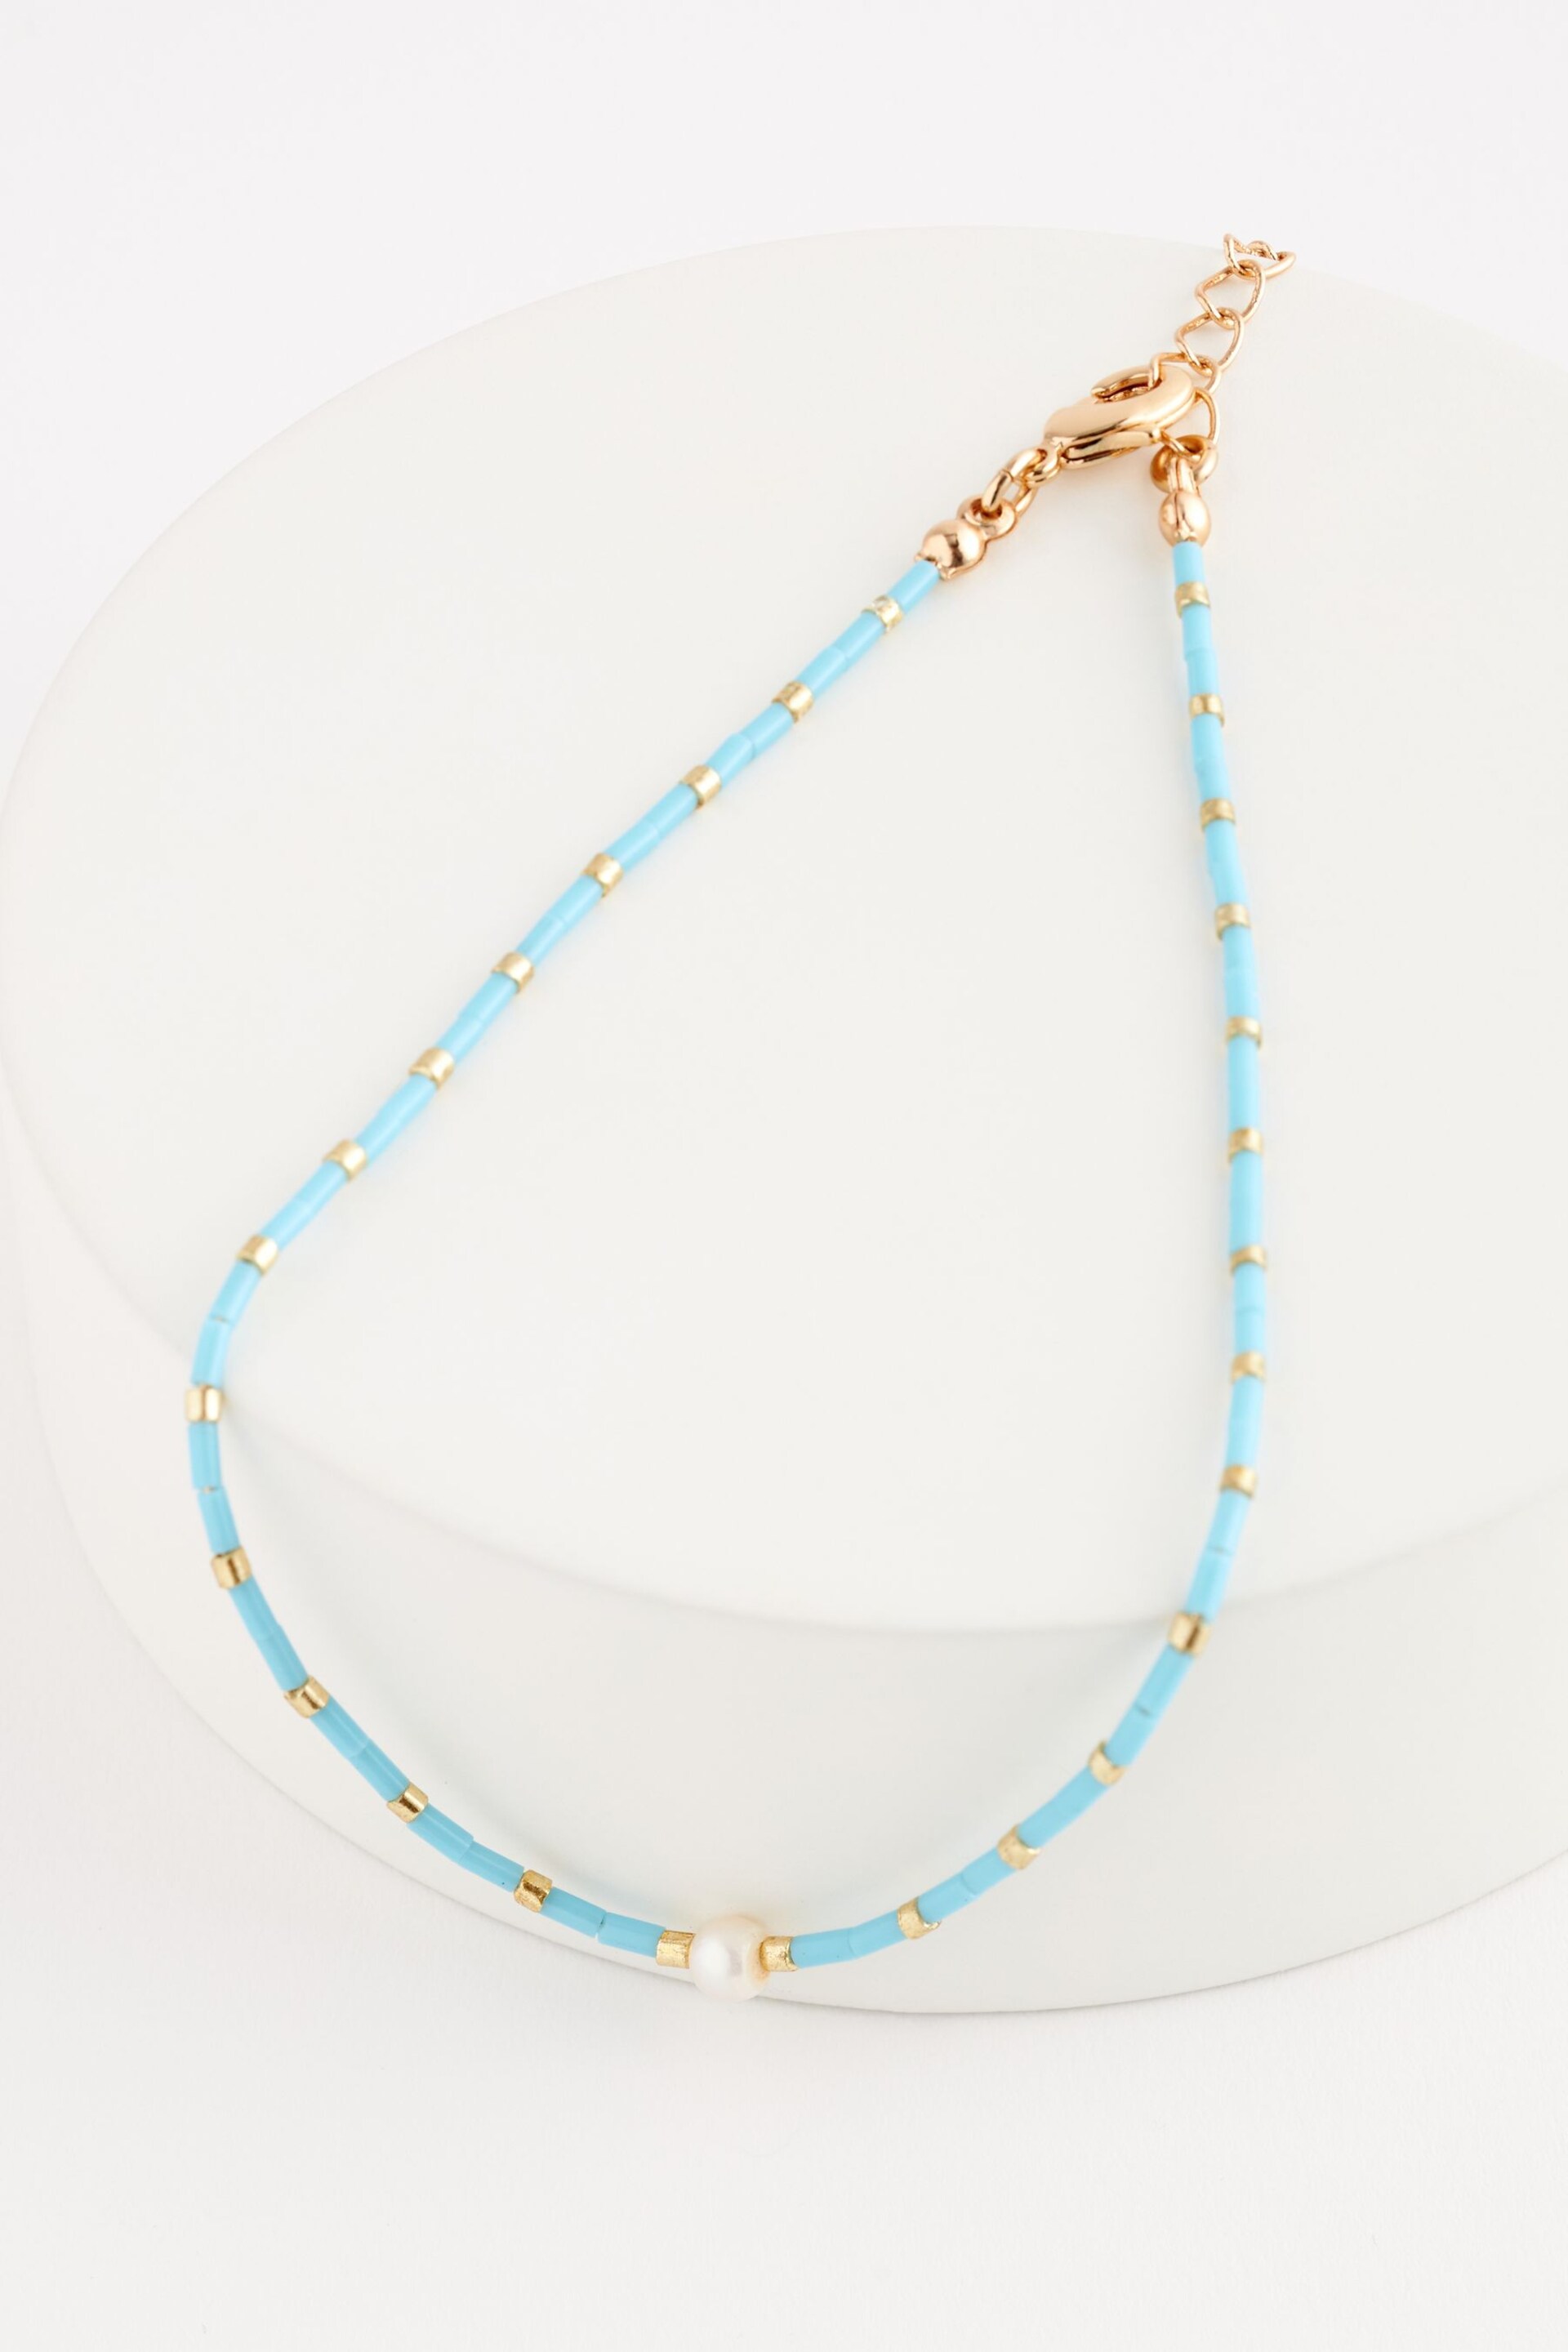 Blue Beaded Anklet - Image 1 of 4